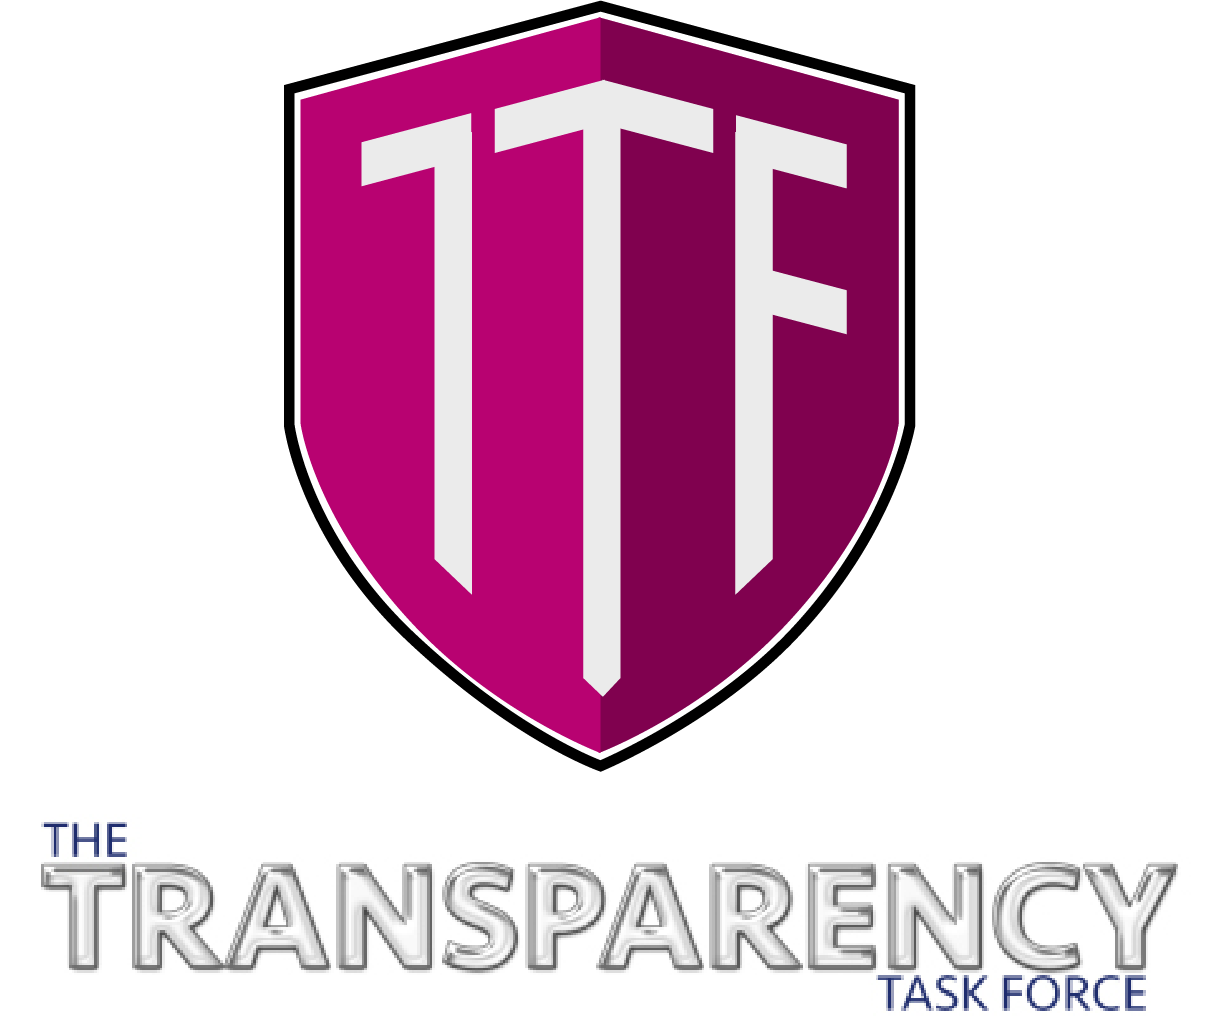 Costs and Charges – are we there yet? organized by The Transparency Task Force